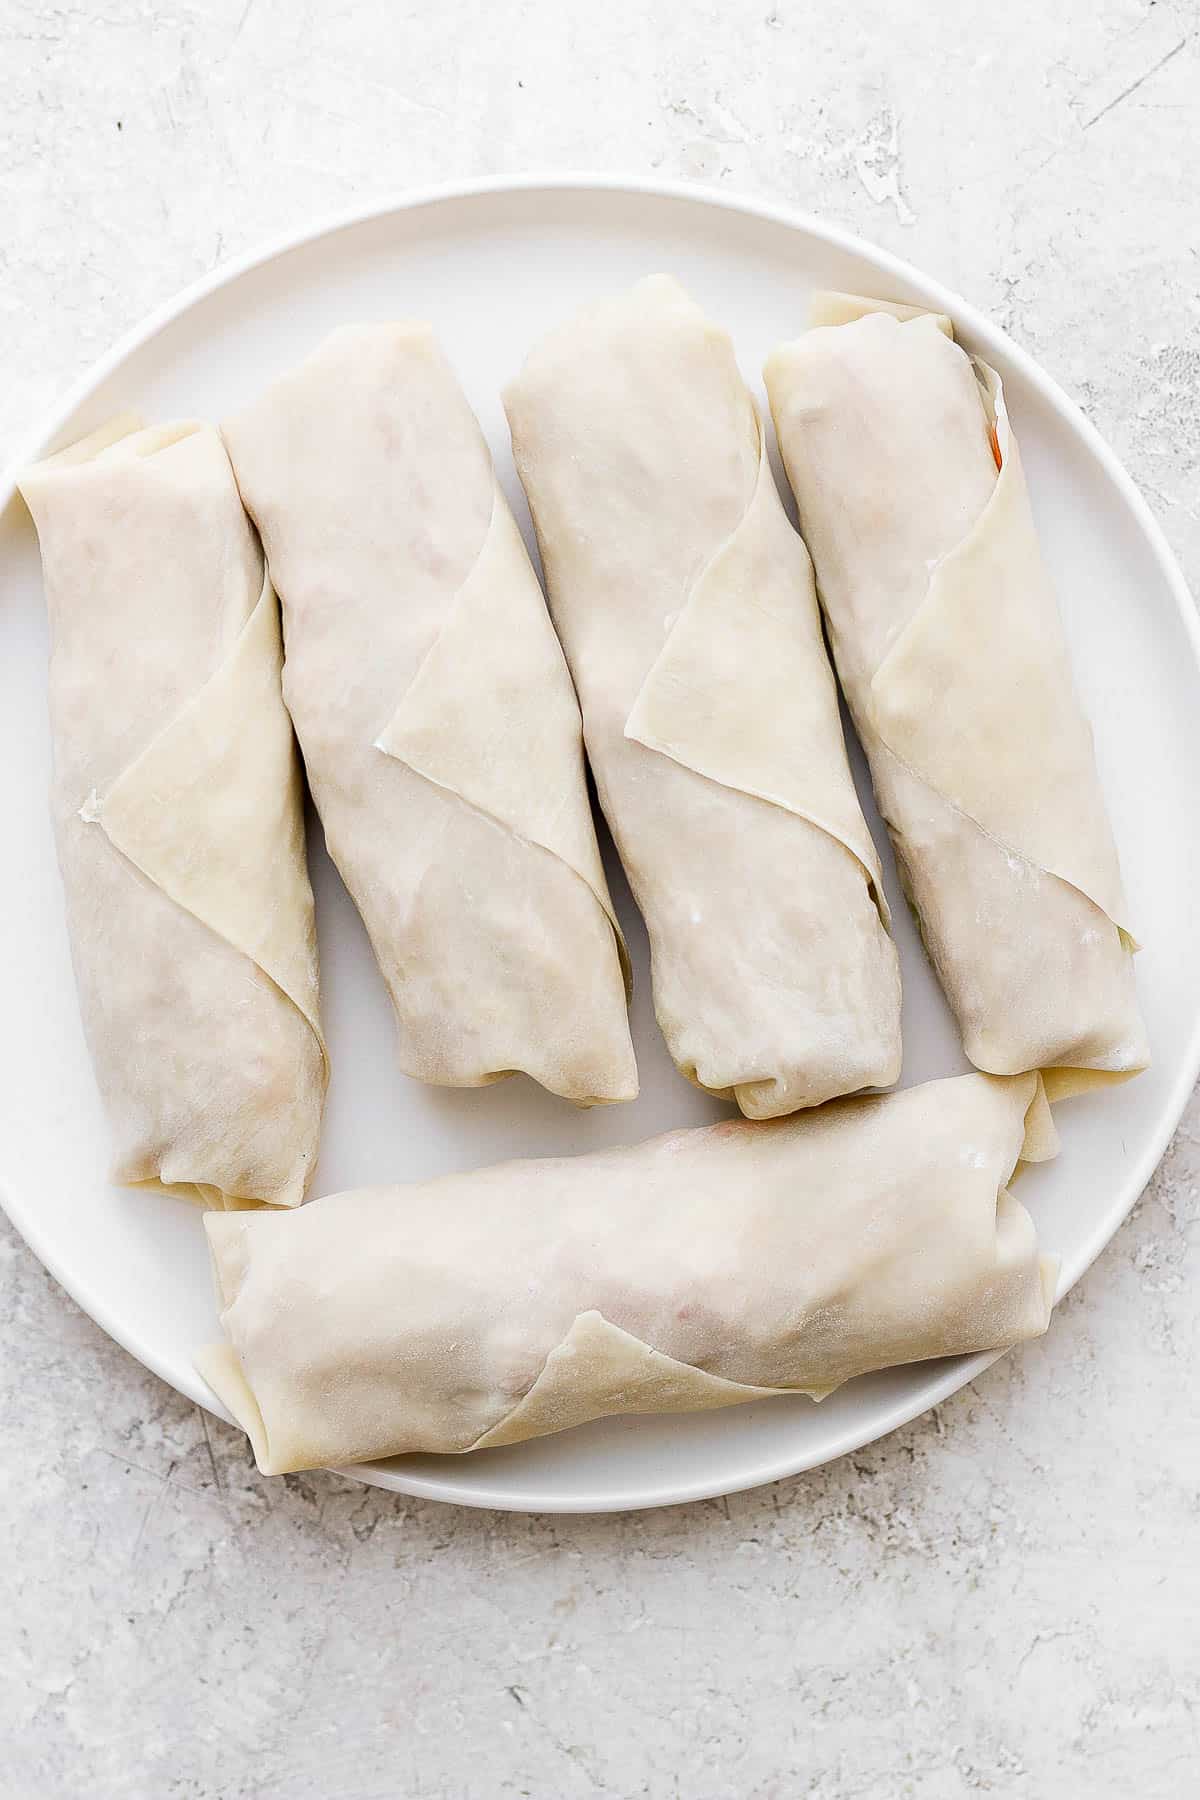 Egg rolls on a white plate before they have been cookied.